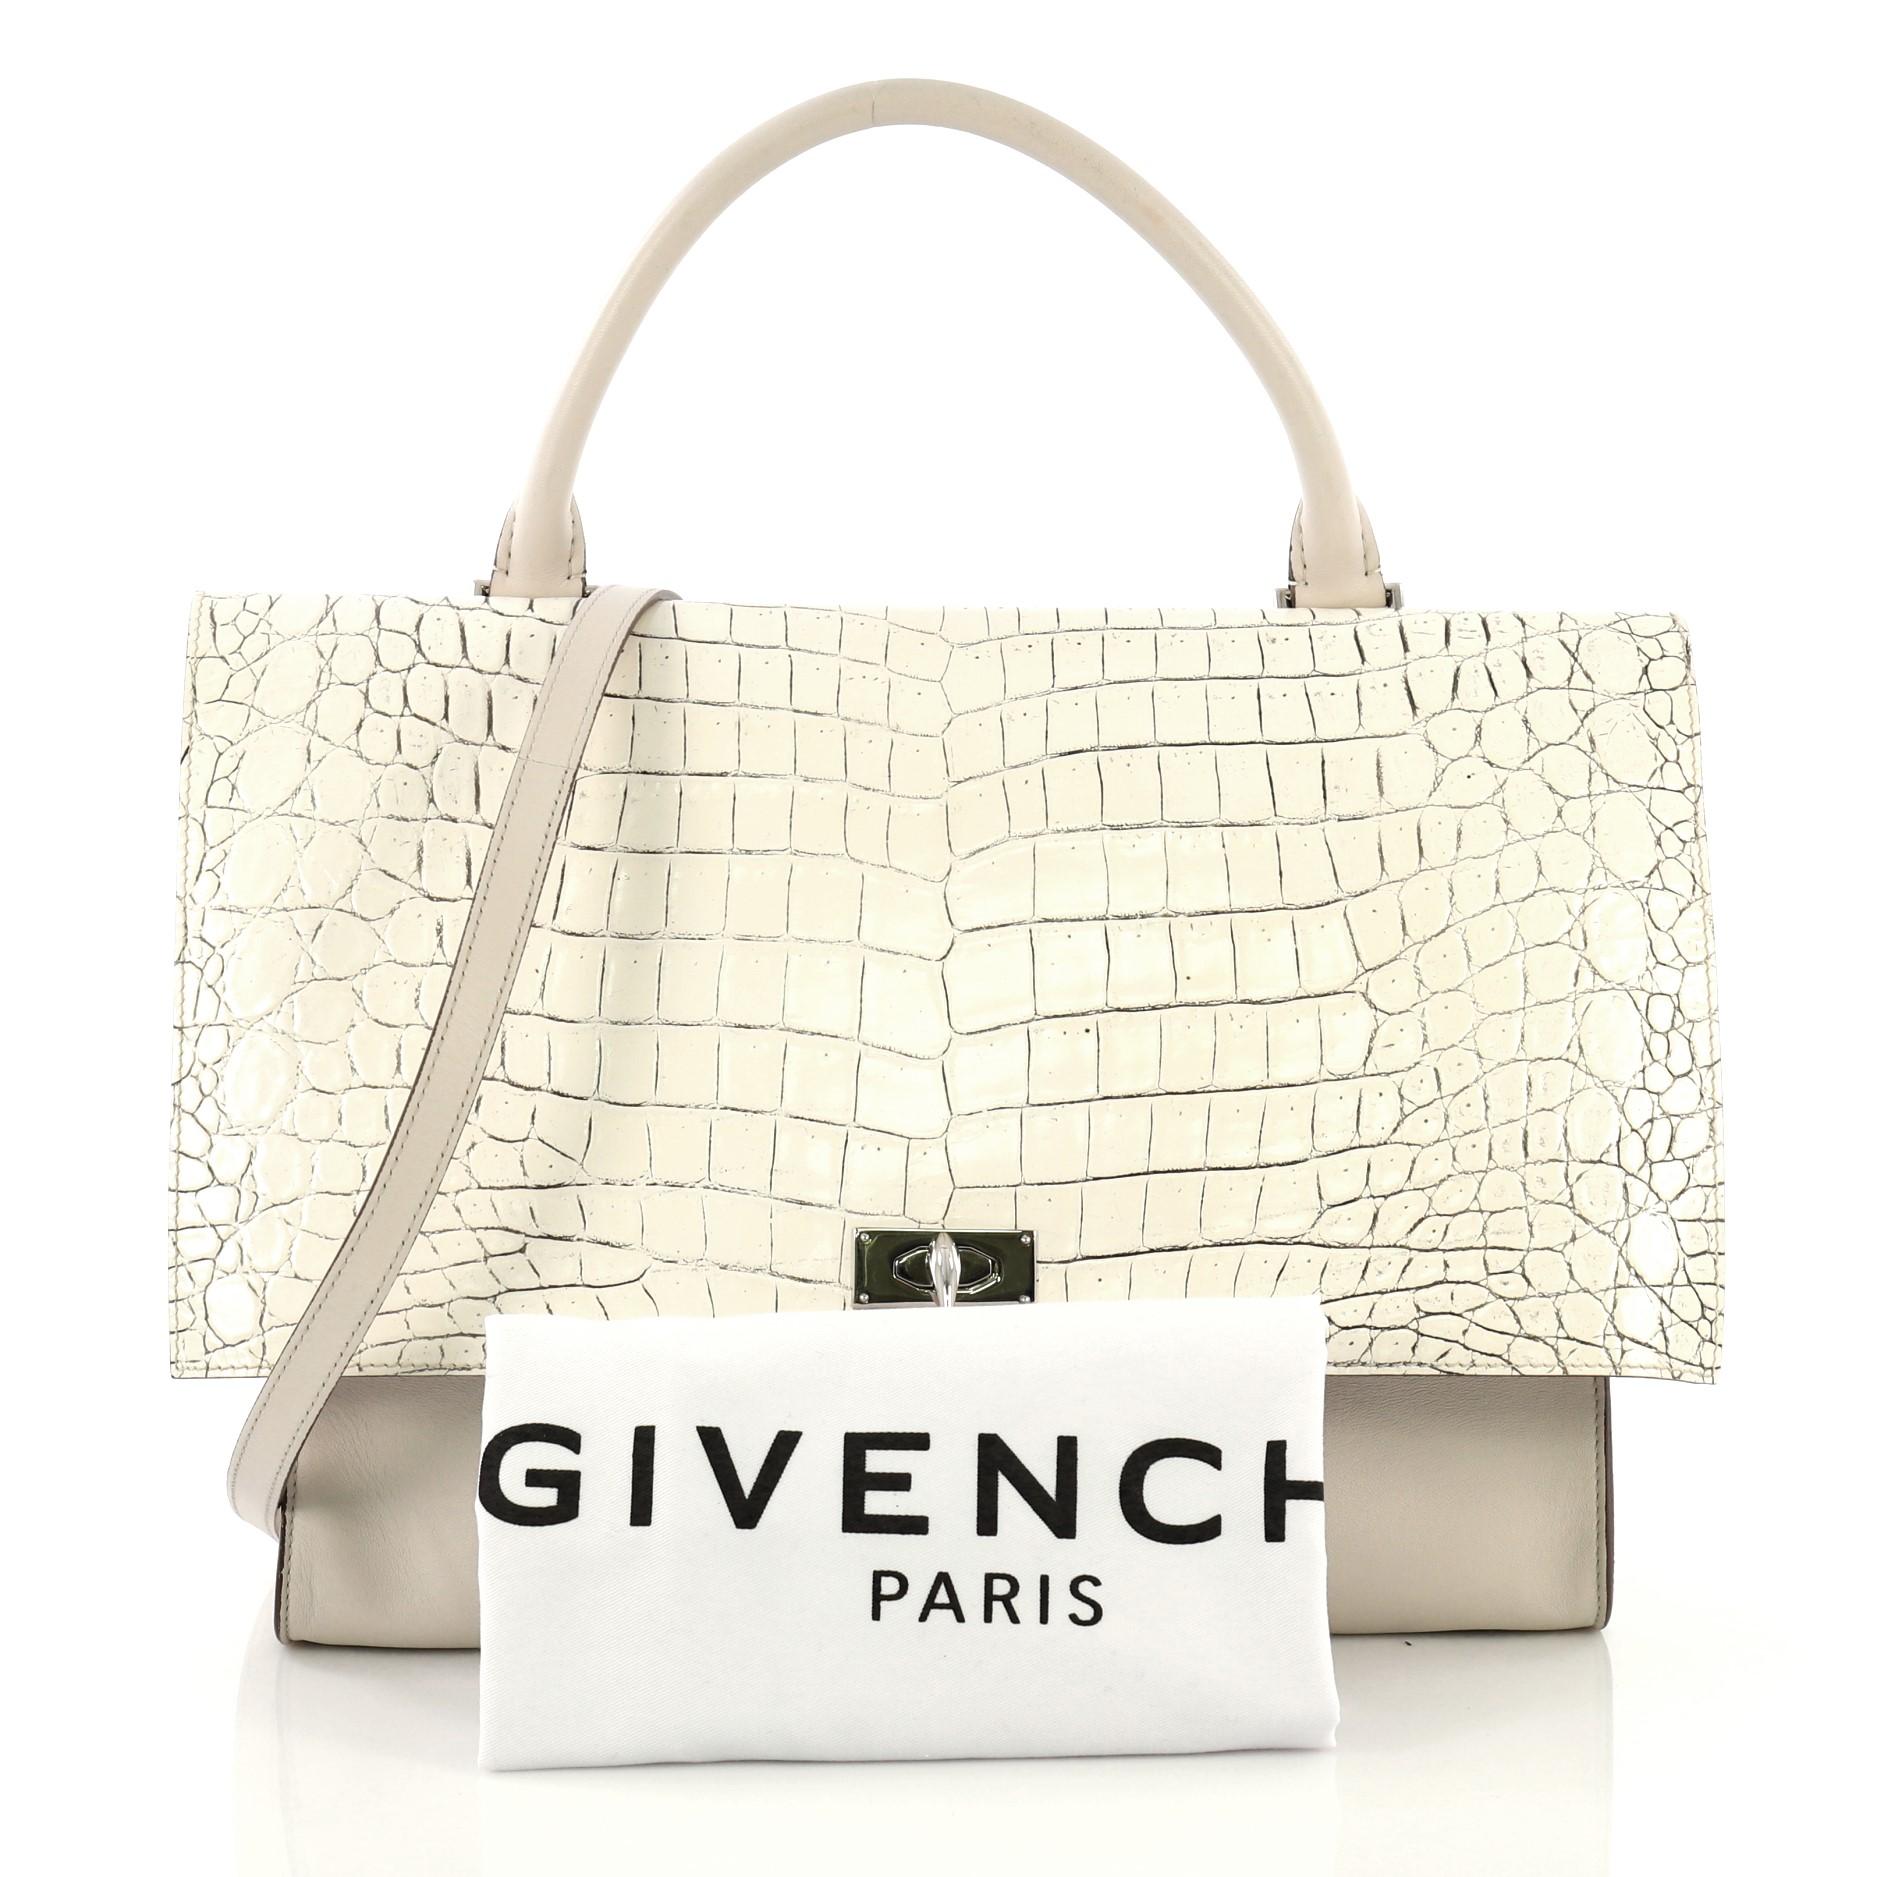 This Givenchy Shark Convertible Satchel Crocodile Embossed Leather Medium, crafted from gray and neutral leather, features a rolled leather handle, signature shark tooth-shaped twist lock, protective base studs, and silver-tone hardware. Its